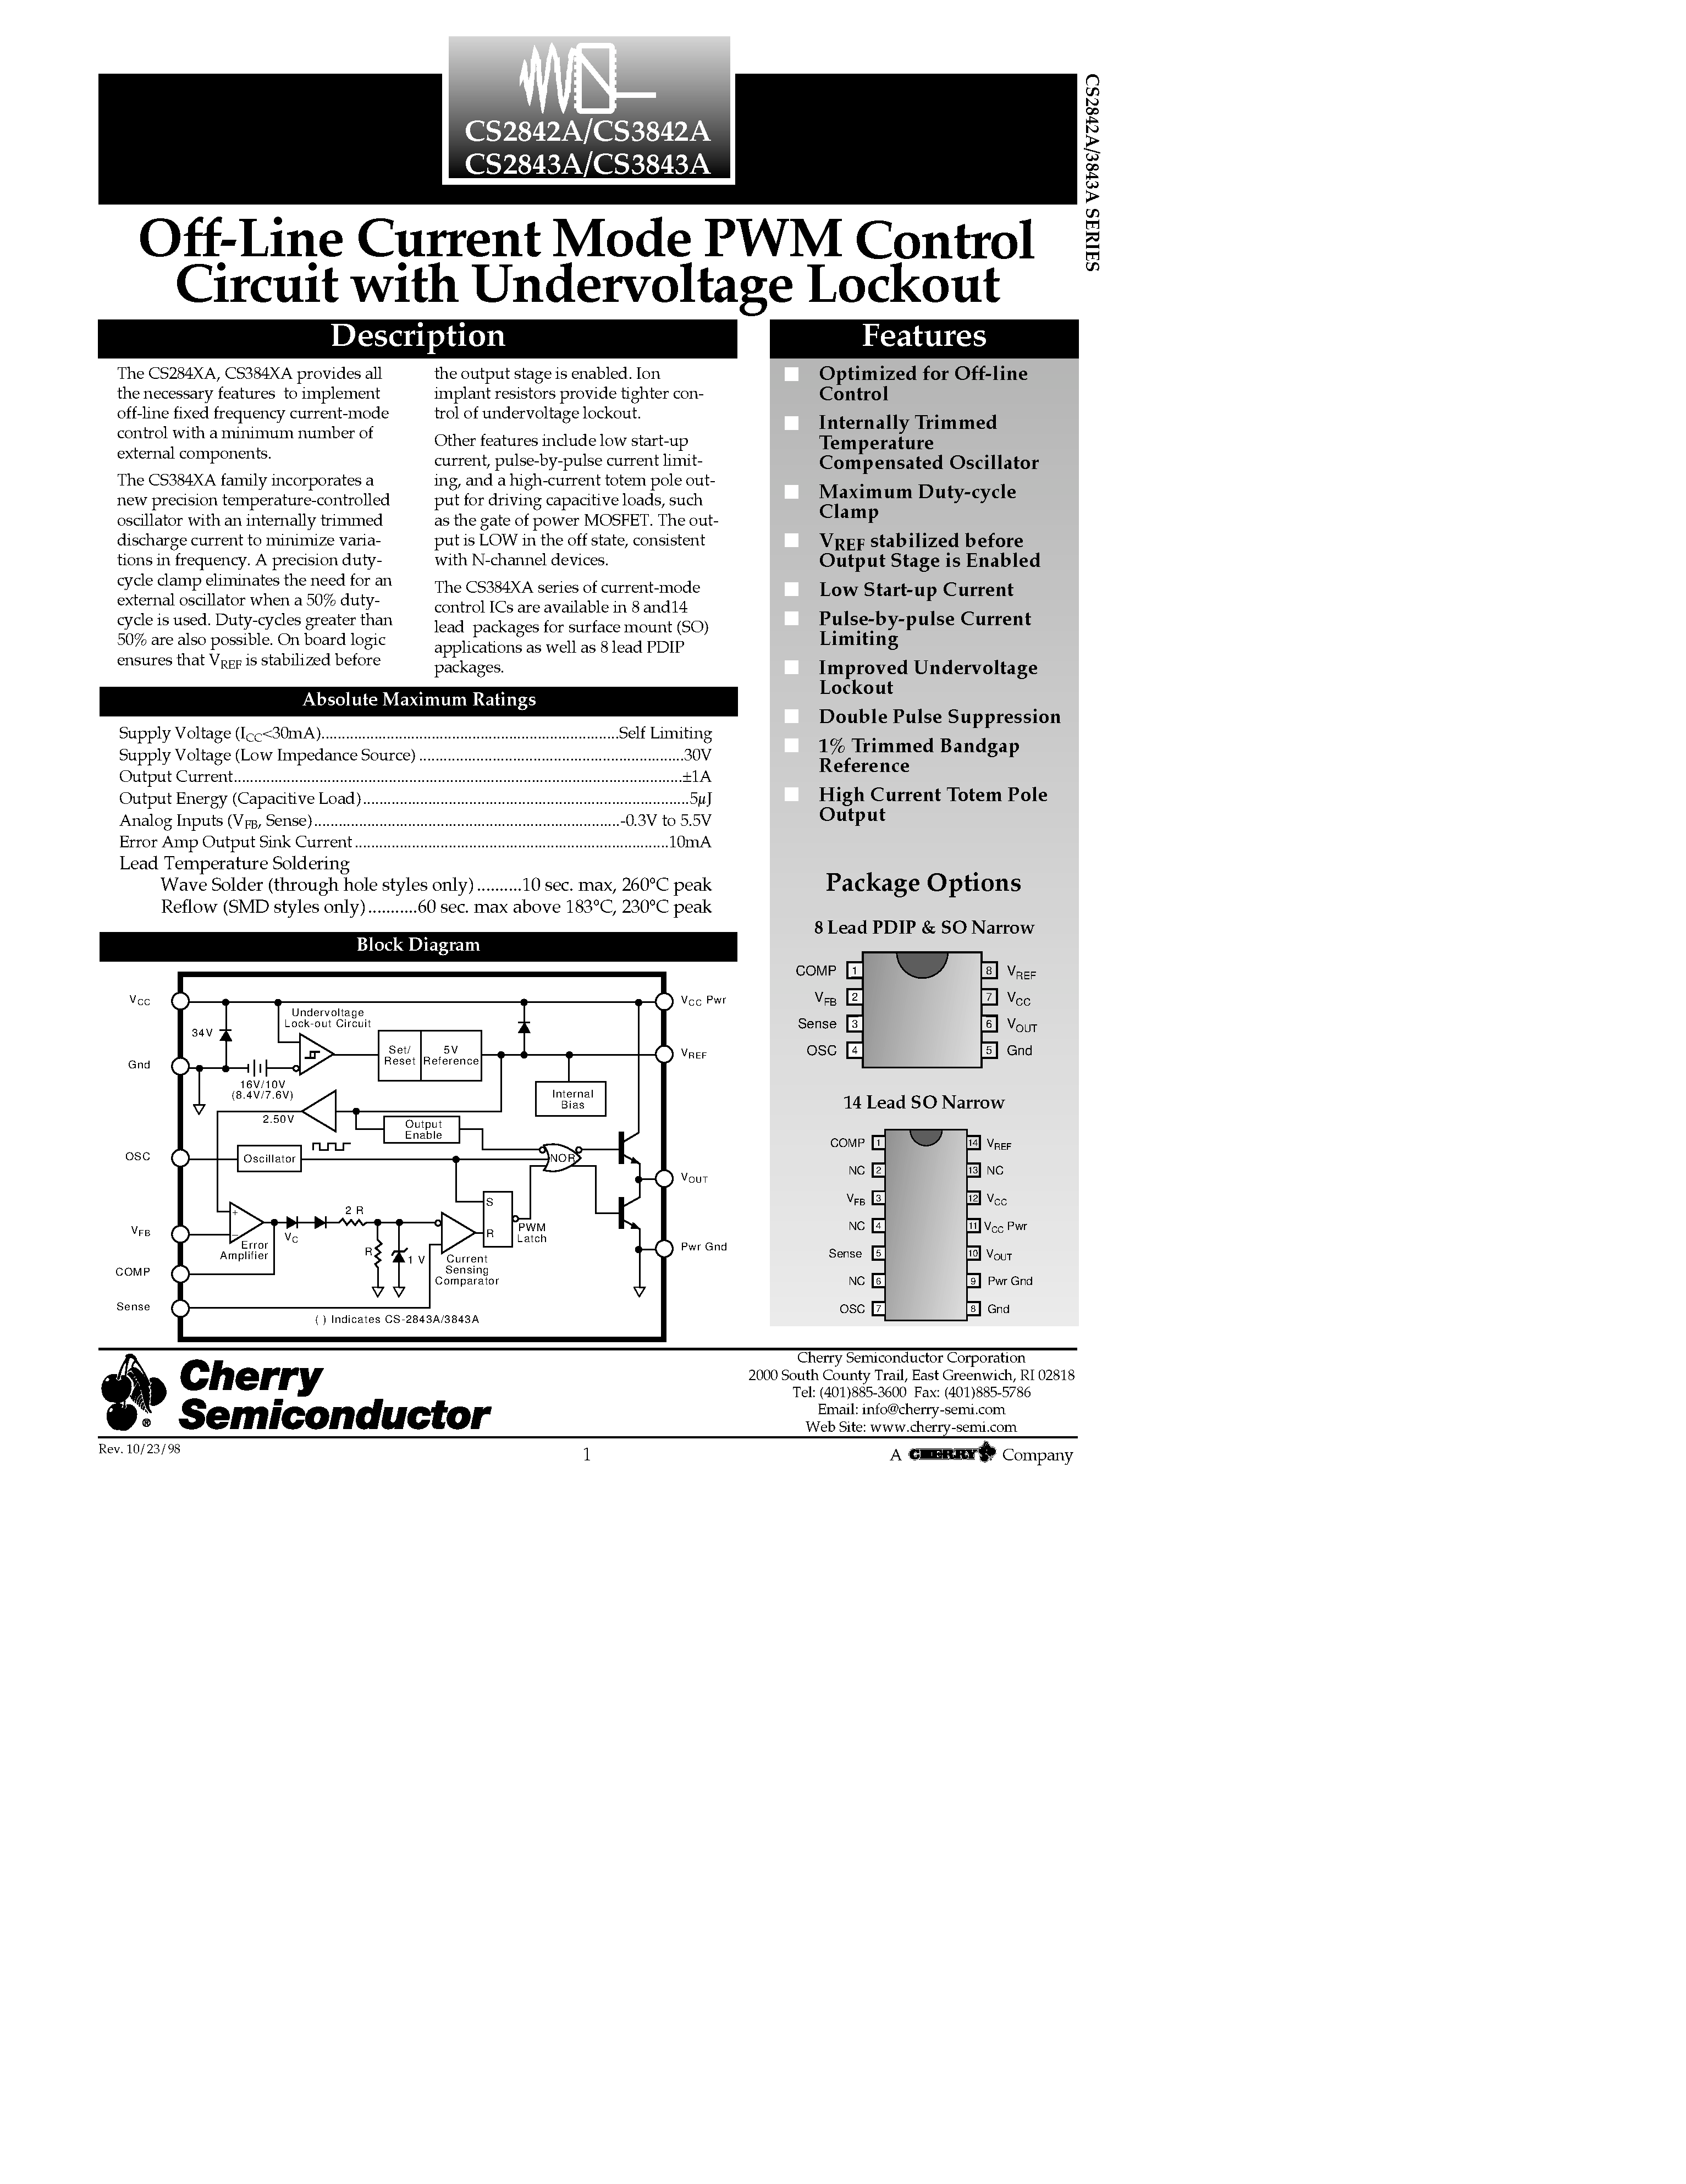 Datasheet CS2842ALN8 - Off-Line Current Mode PWM Control Circuit with Undervoltage Lockout page 1